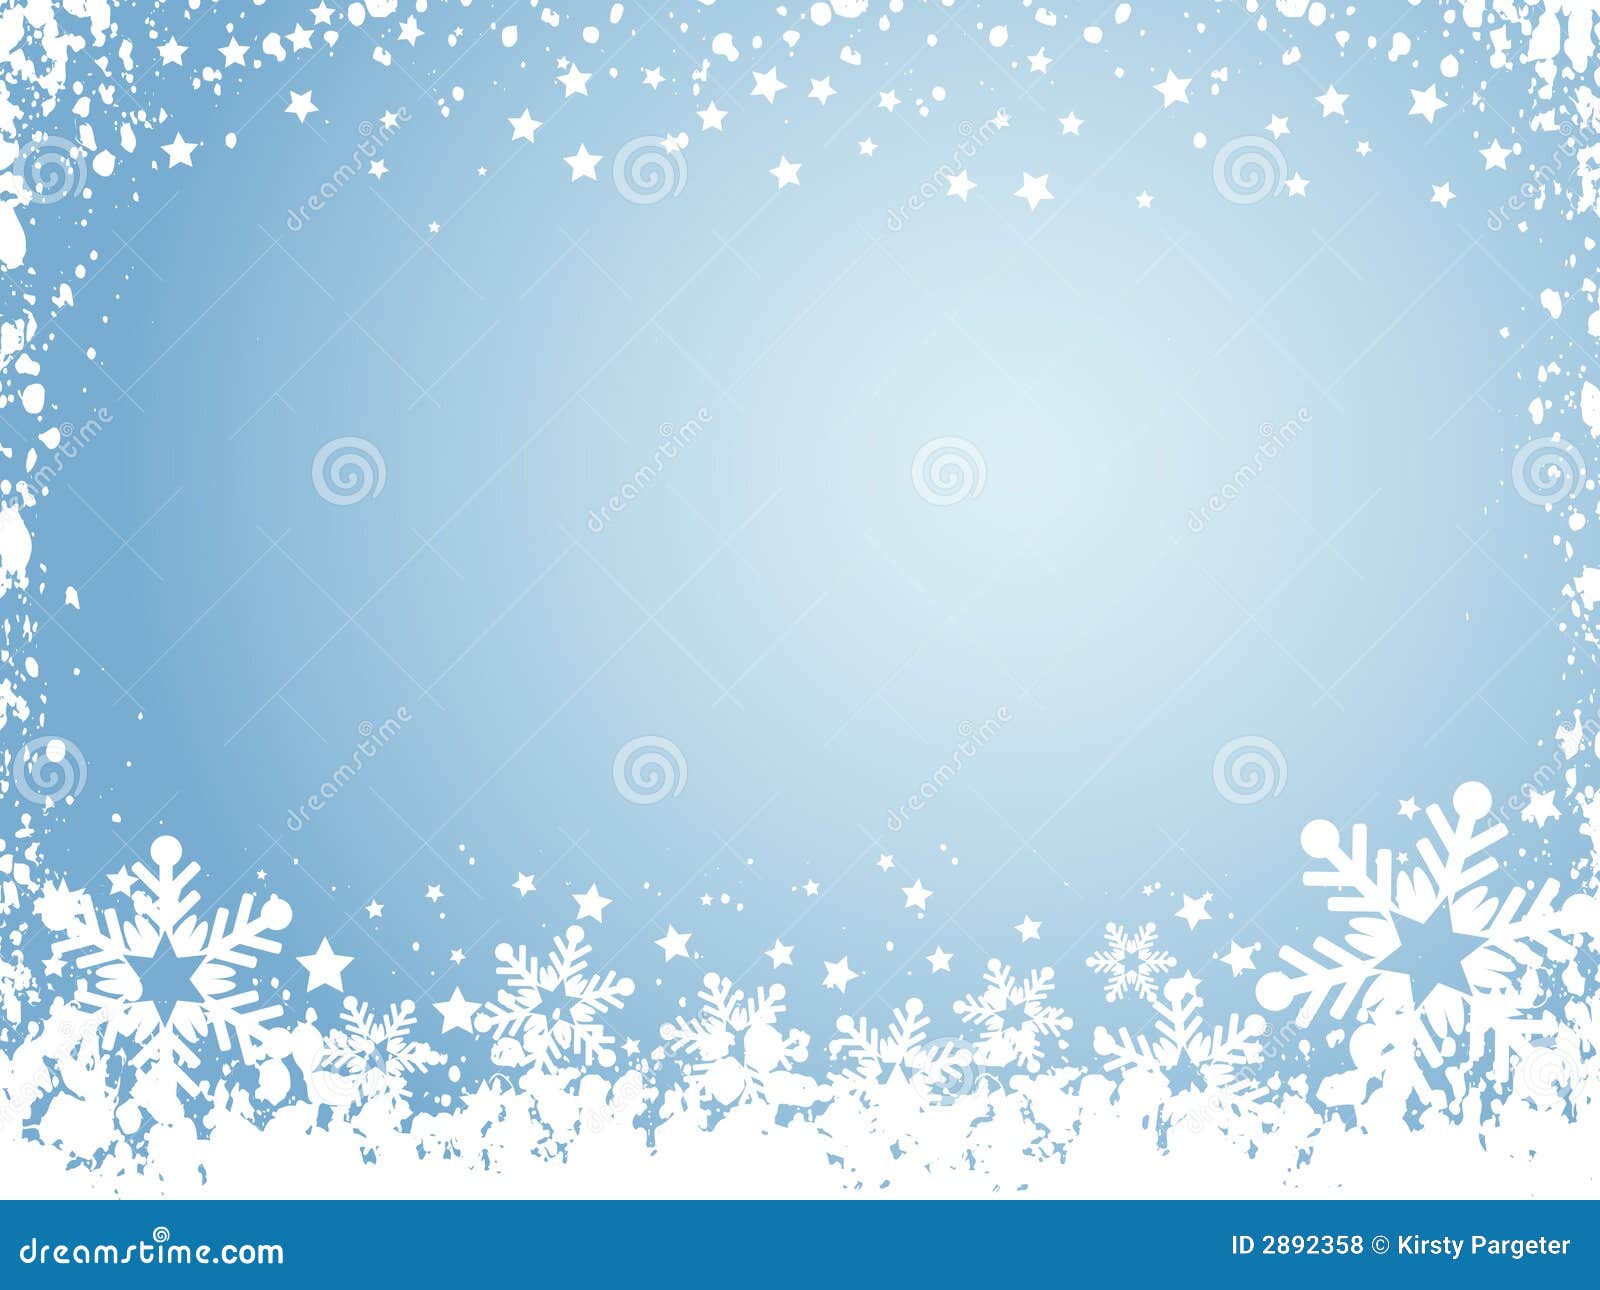 clipart snowflake background - photo #6